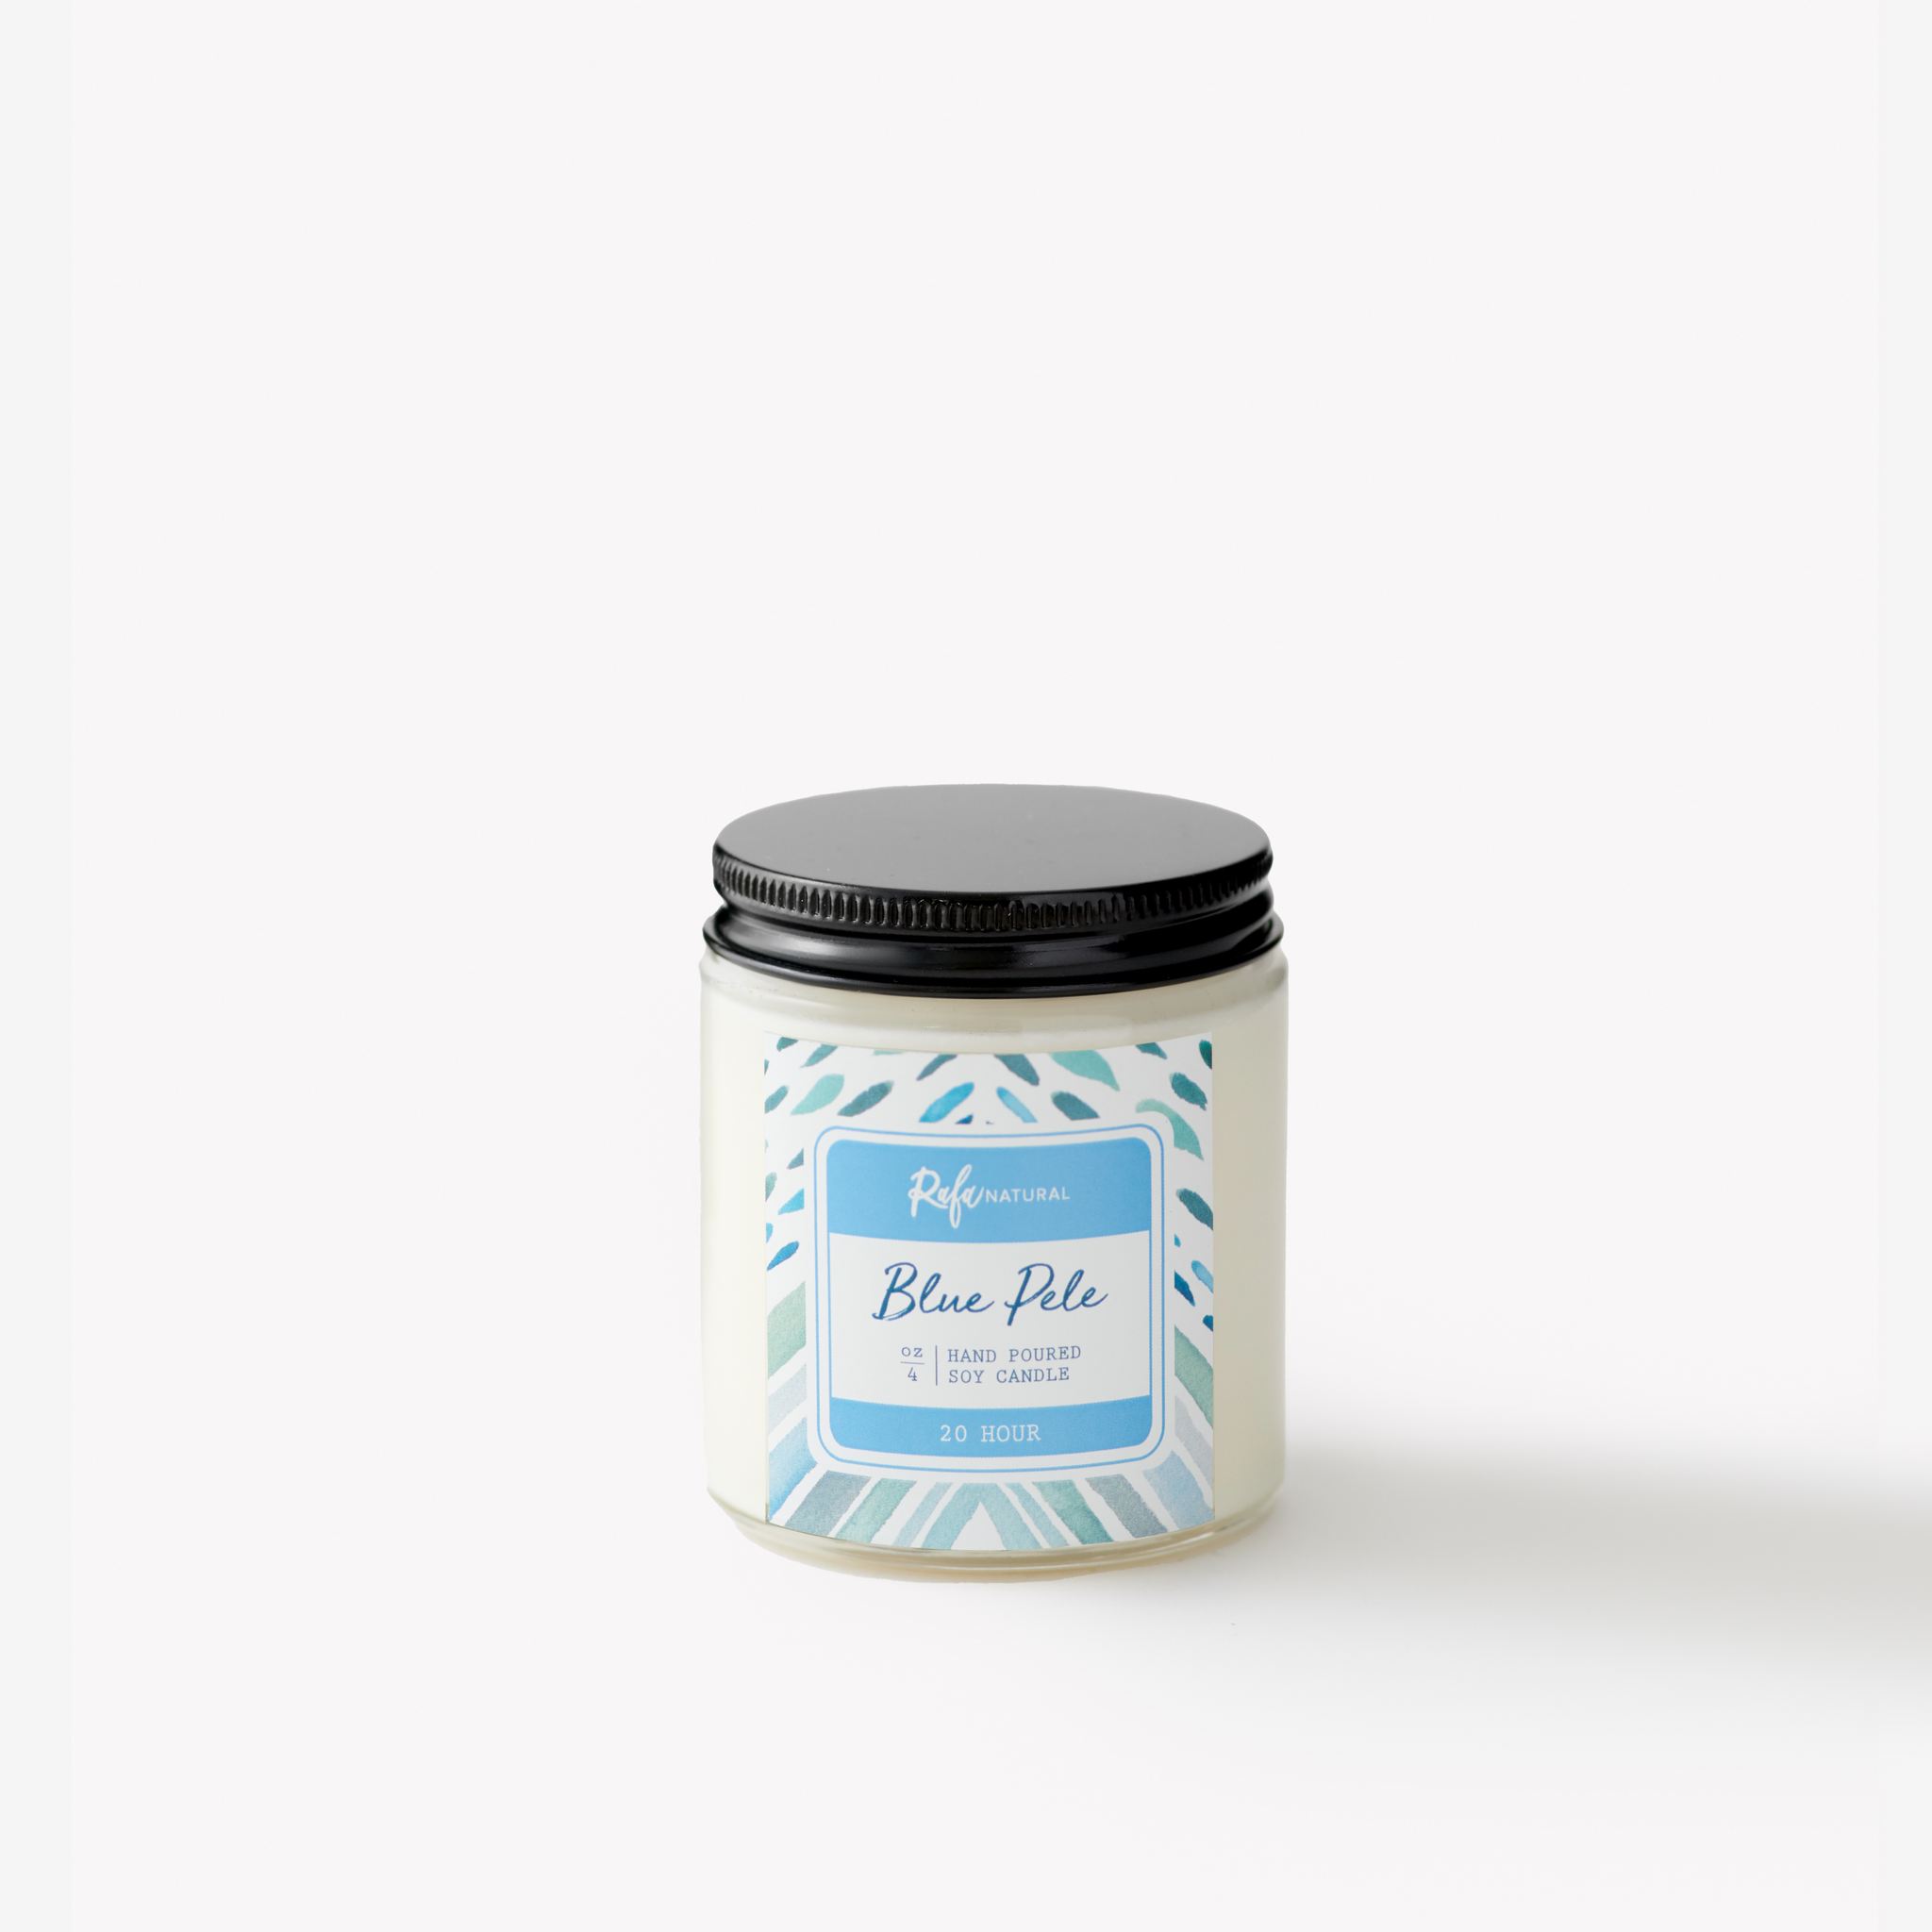 Blue Pele 20Hr Soy Candle by Rafa Natural